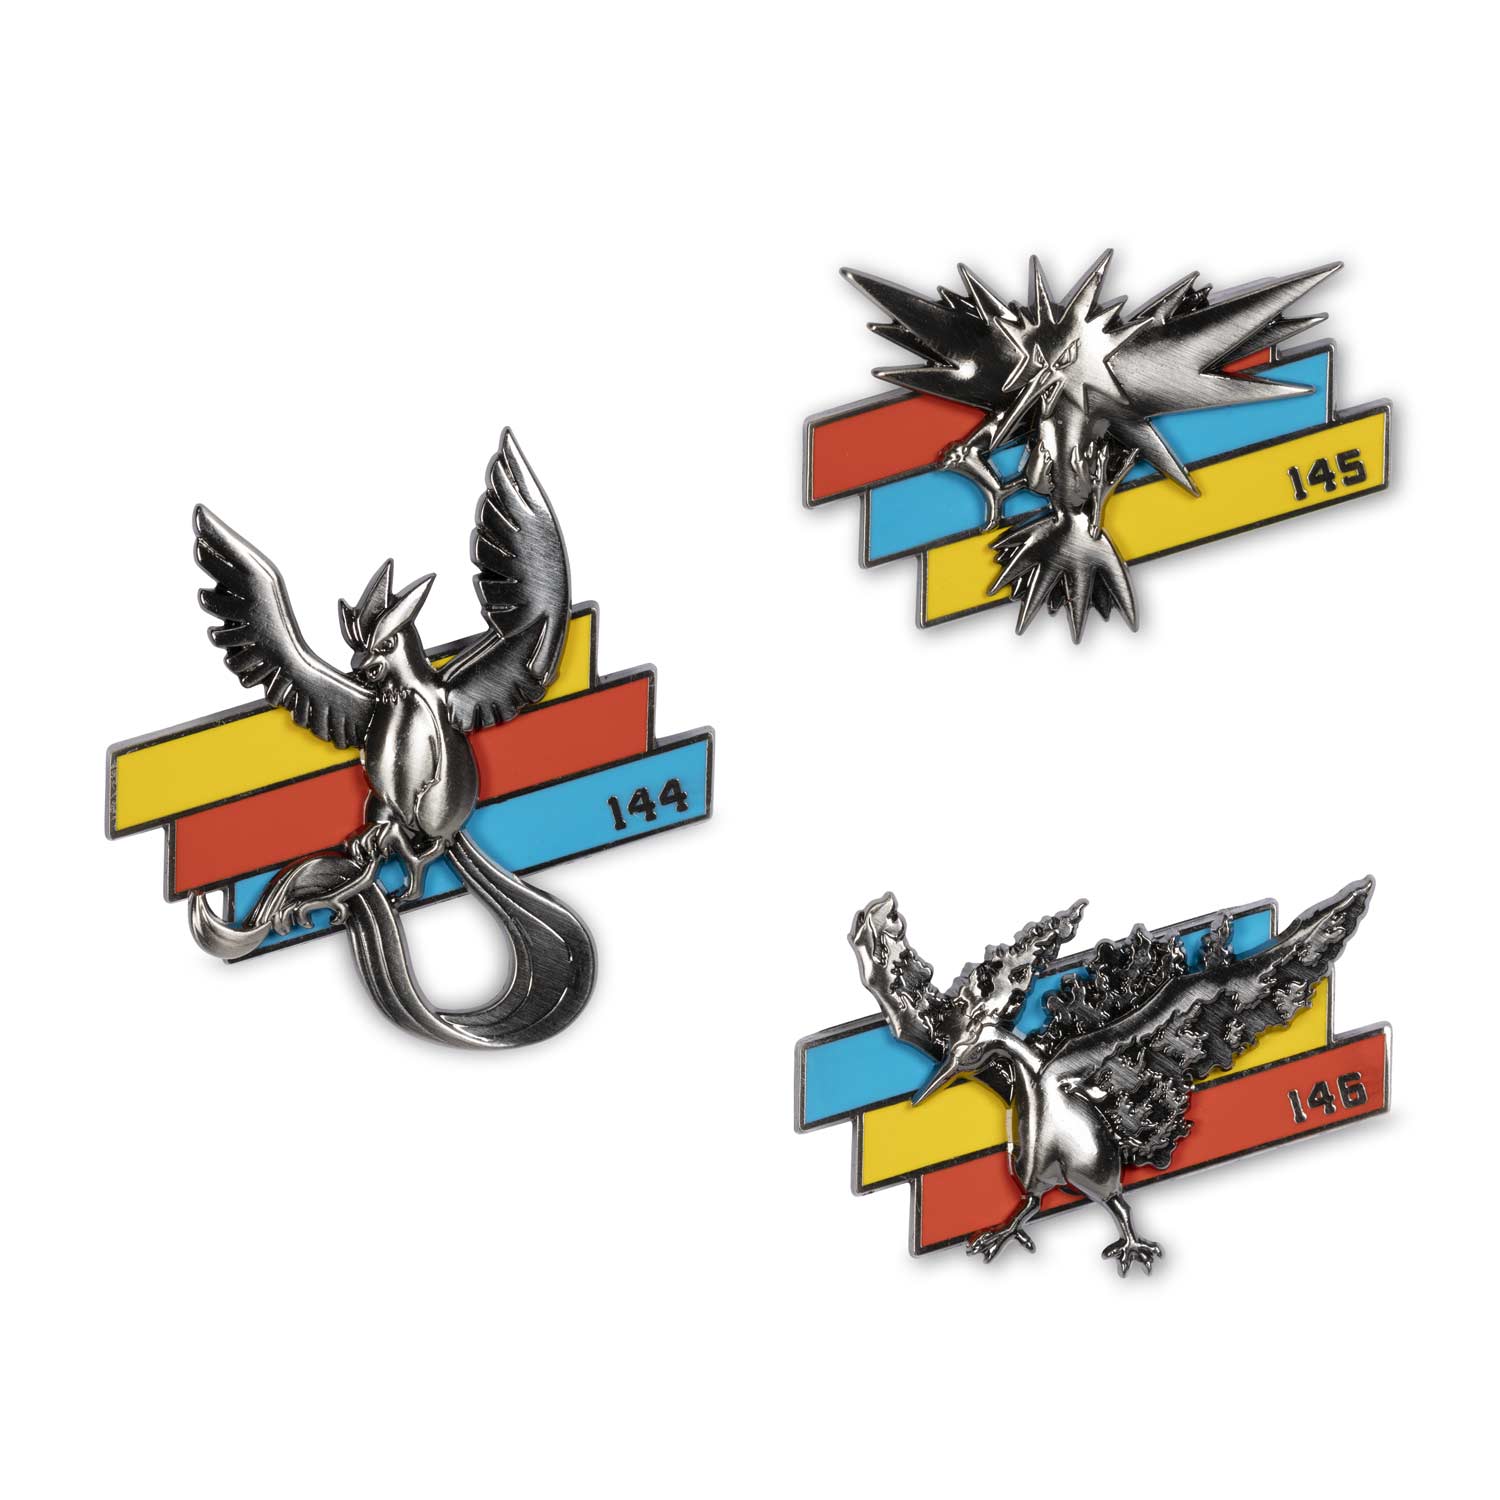 Articuno Zapdos Moltres Better Together Pokemon Pins 3 Pack